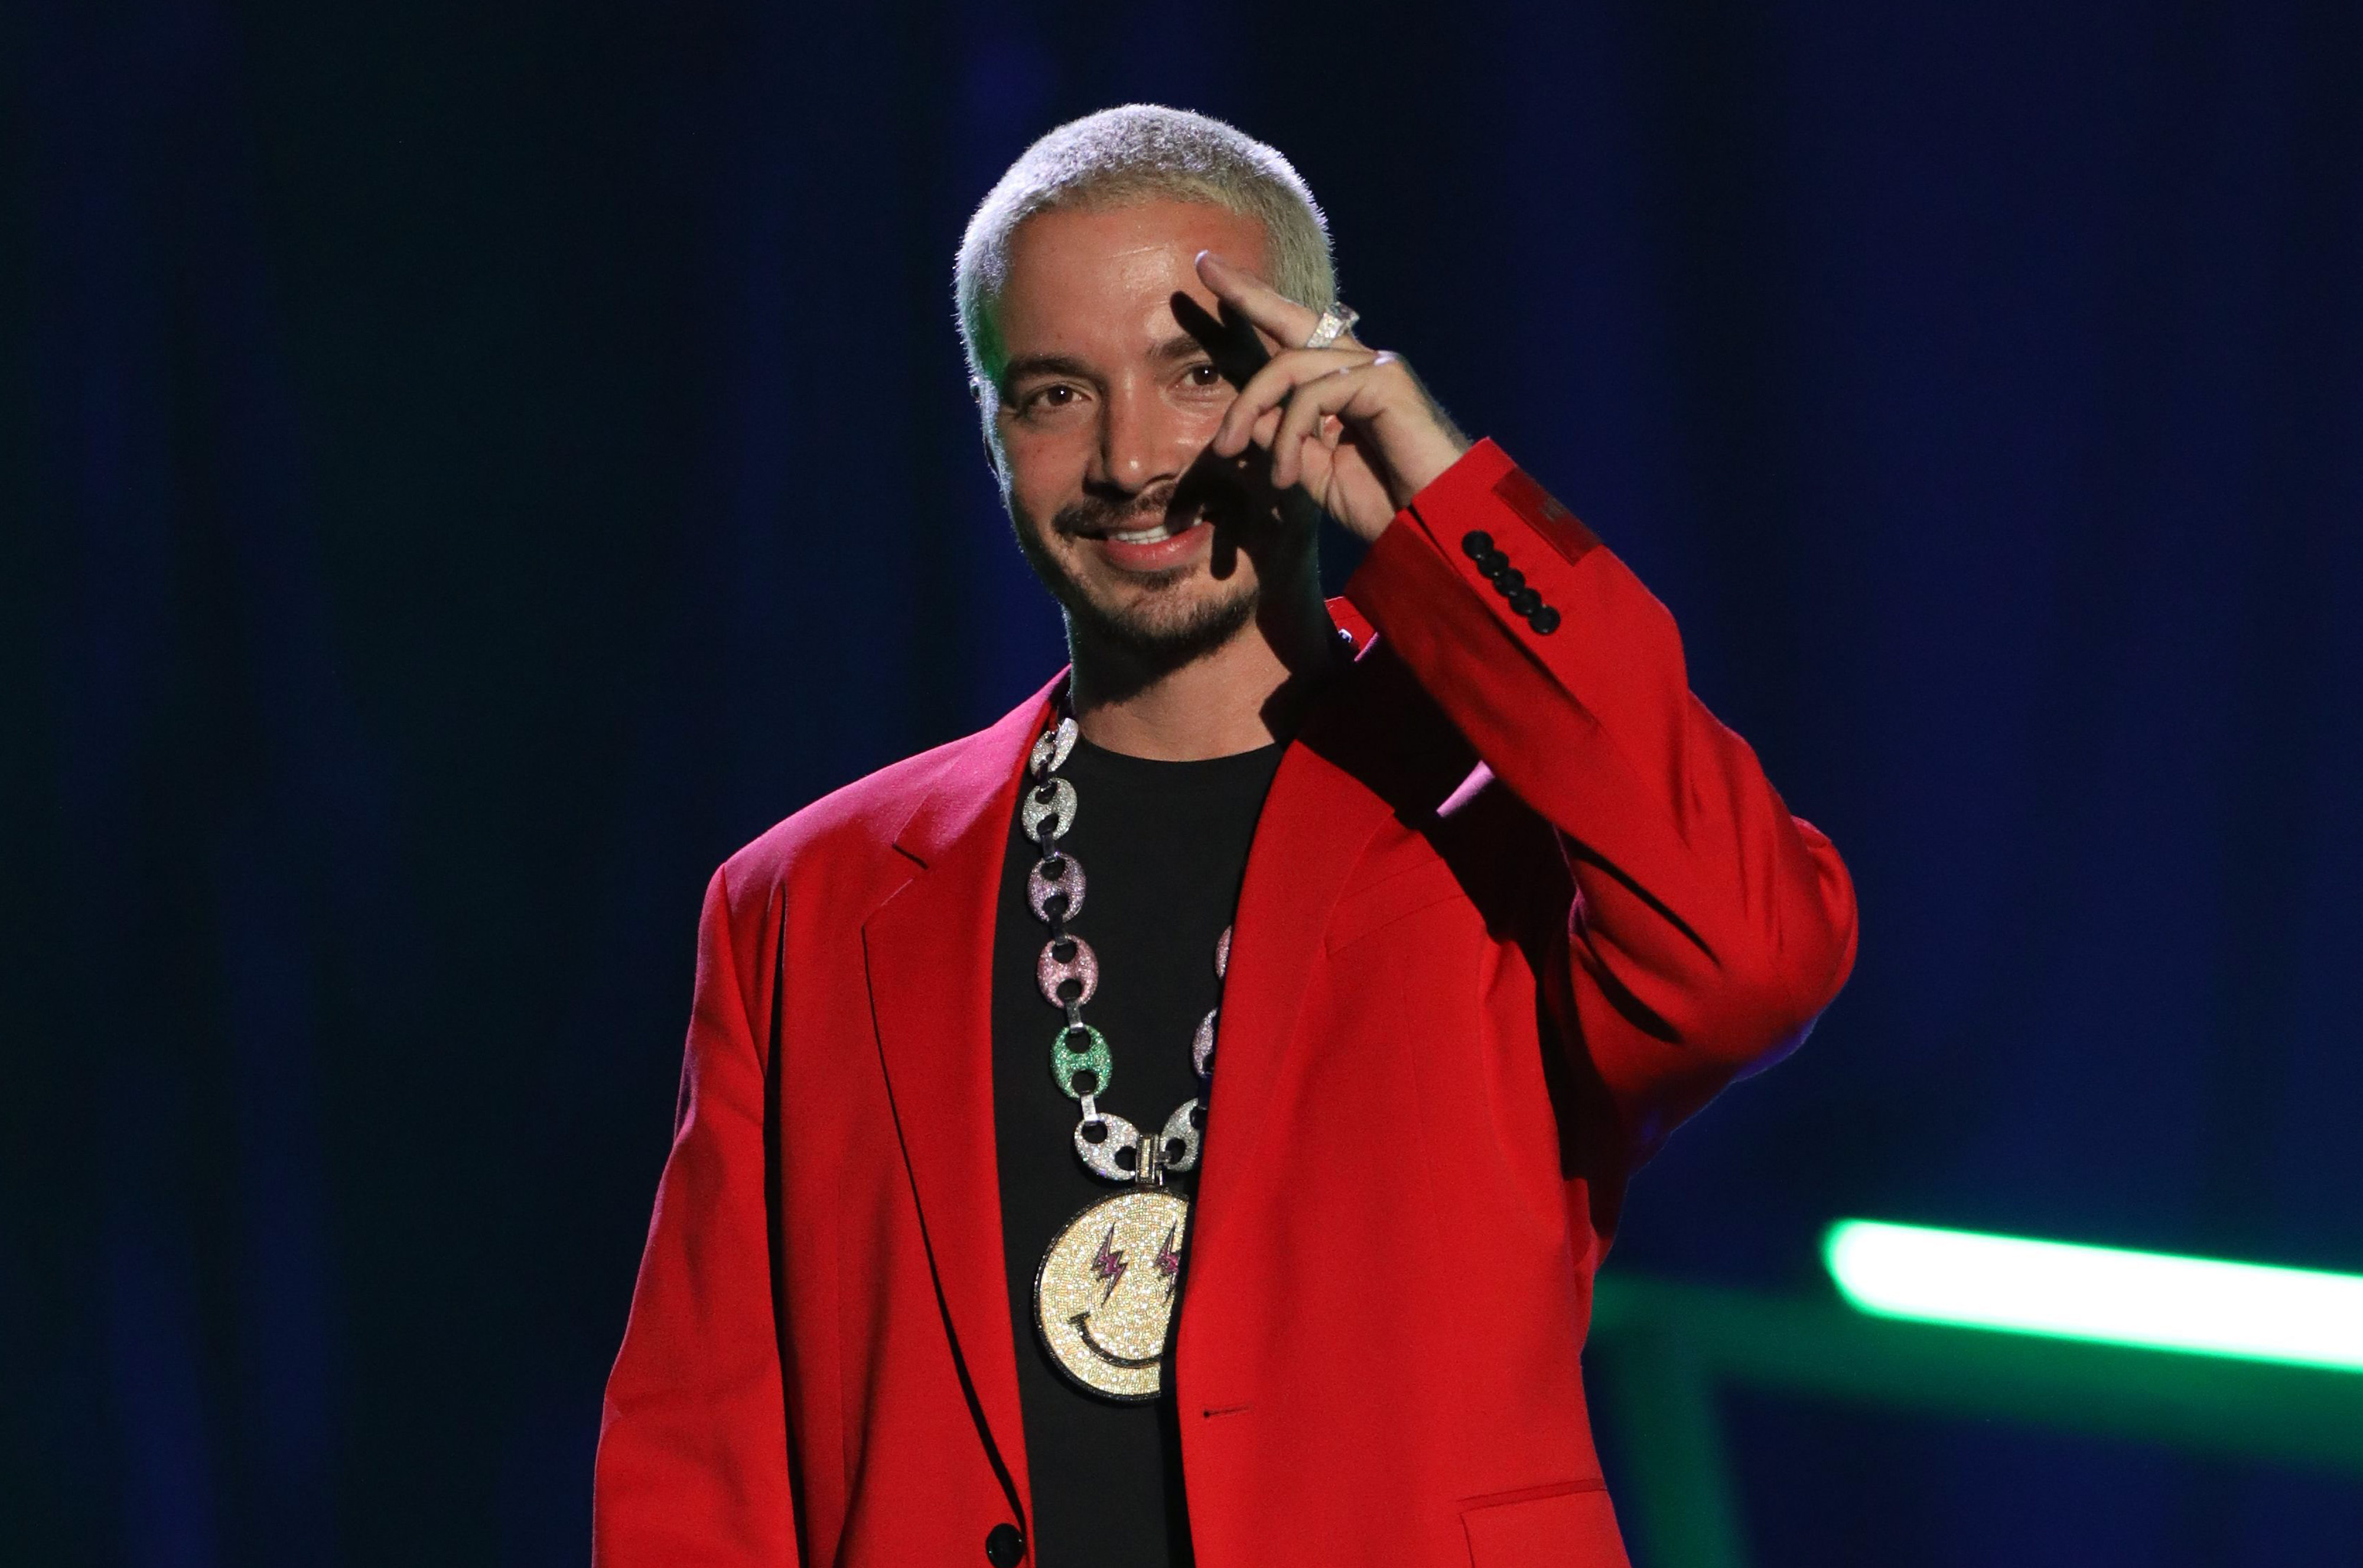 Exclusive: J Balvin, Anuel AA and Ozuna are set to headline the